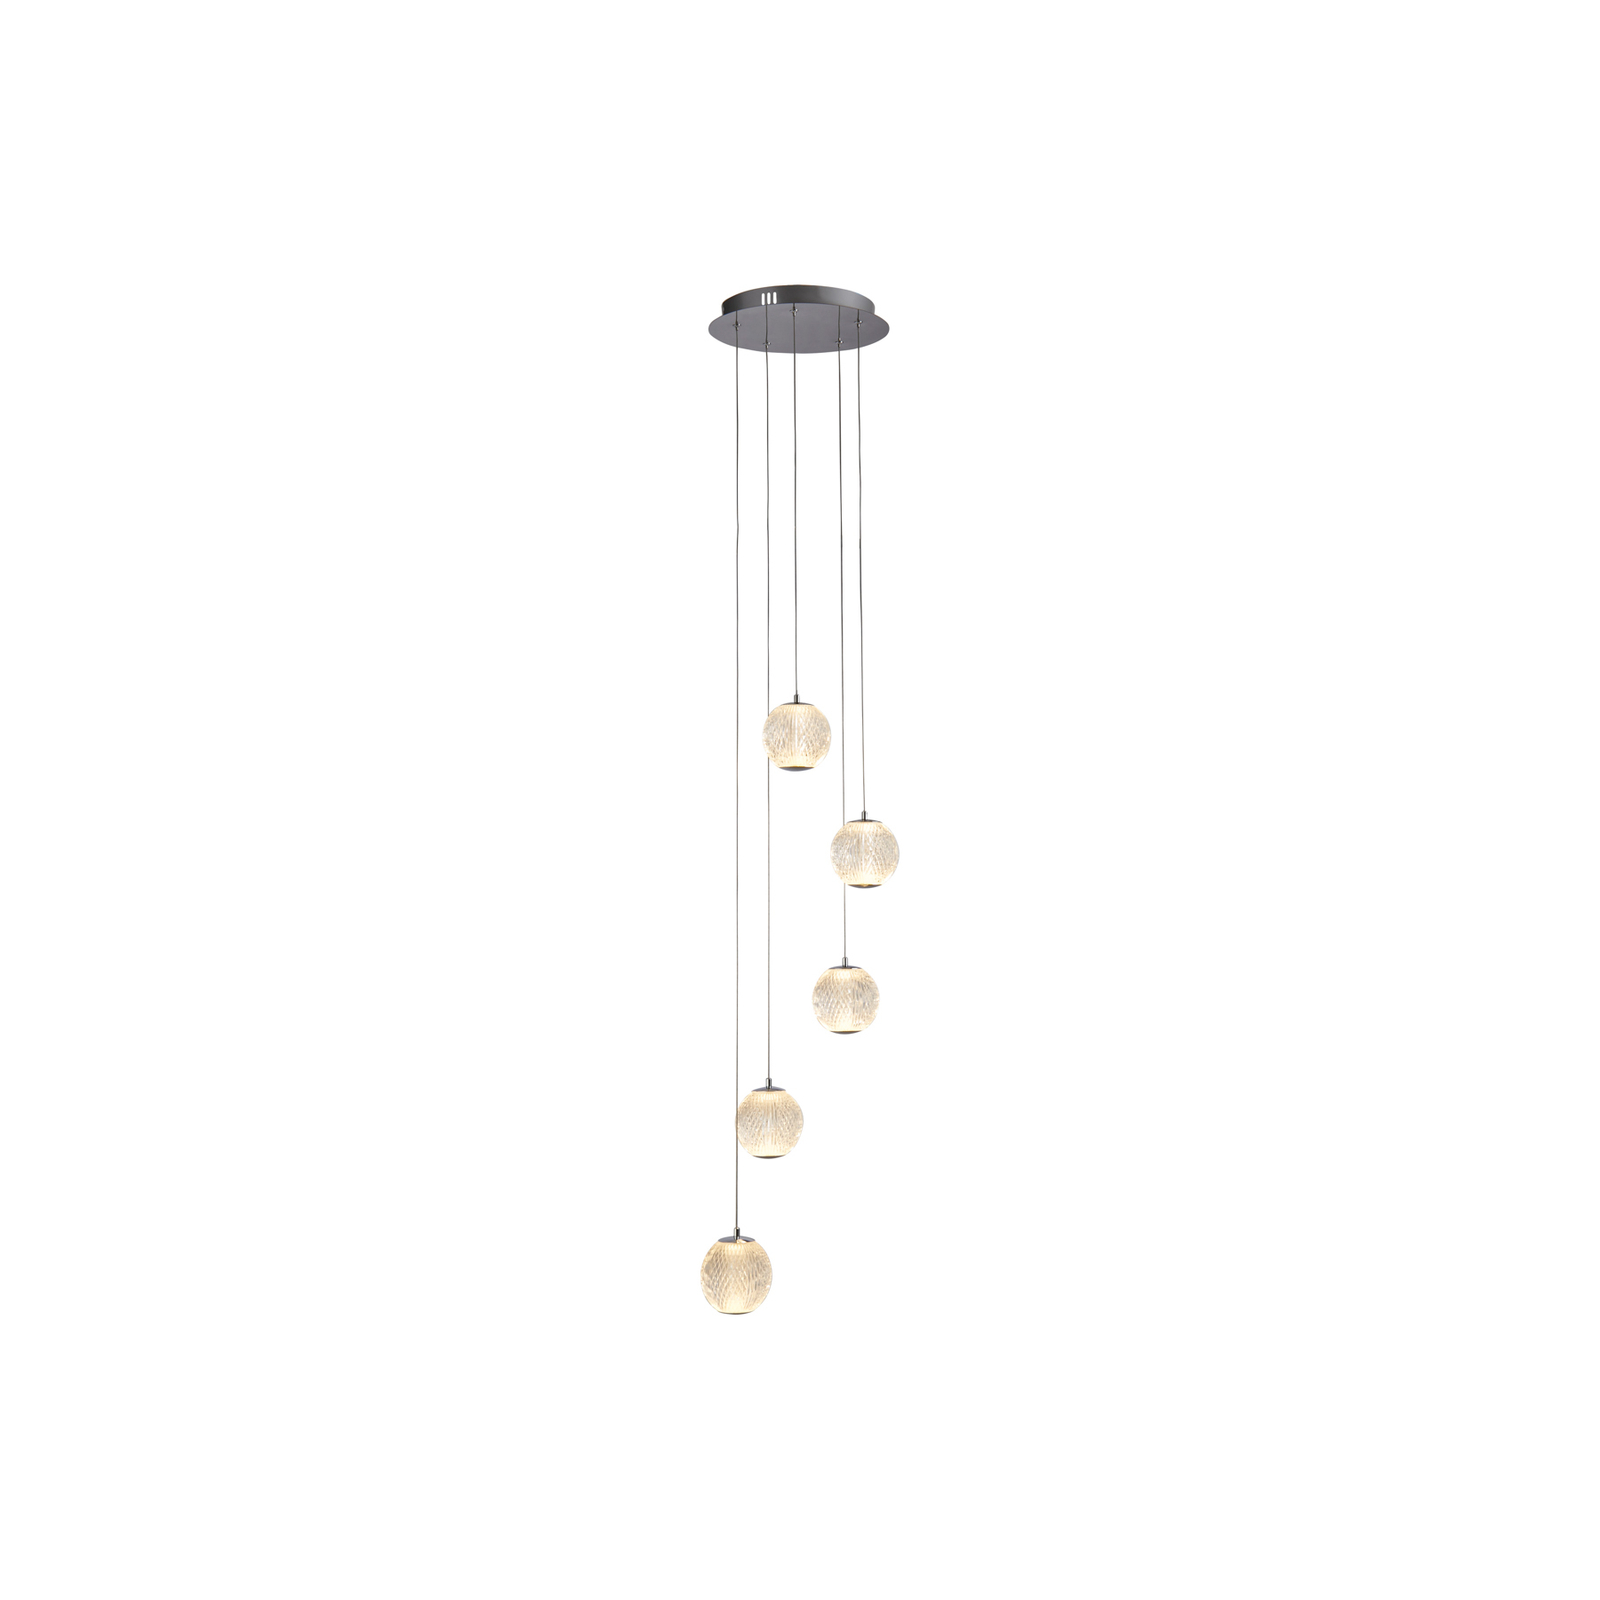 LED hanglamp Allure, rond, 5-lamps